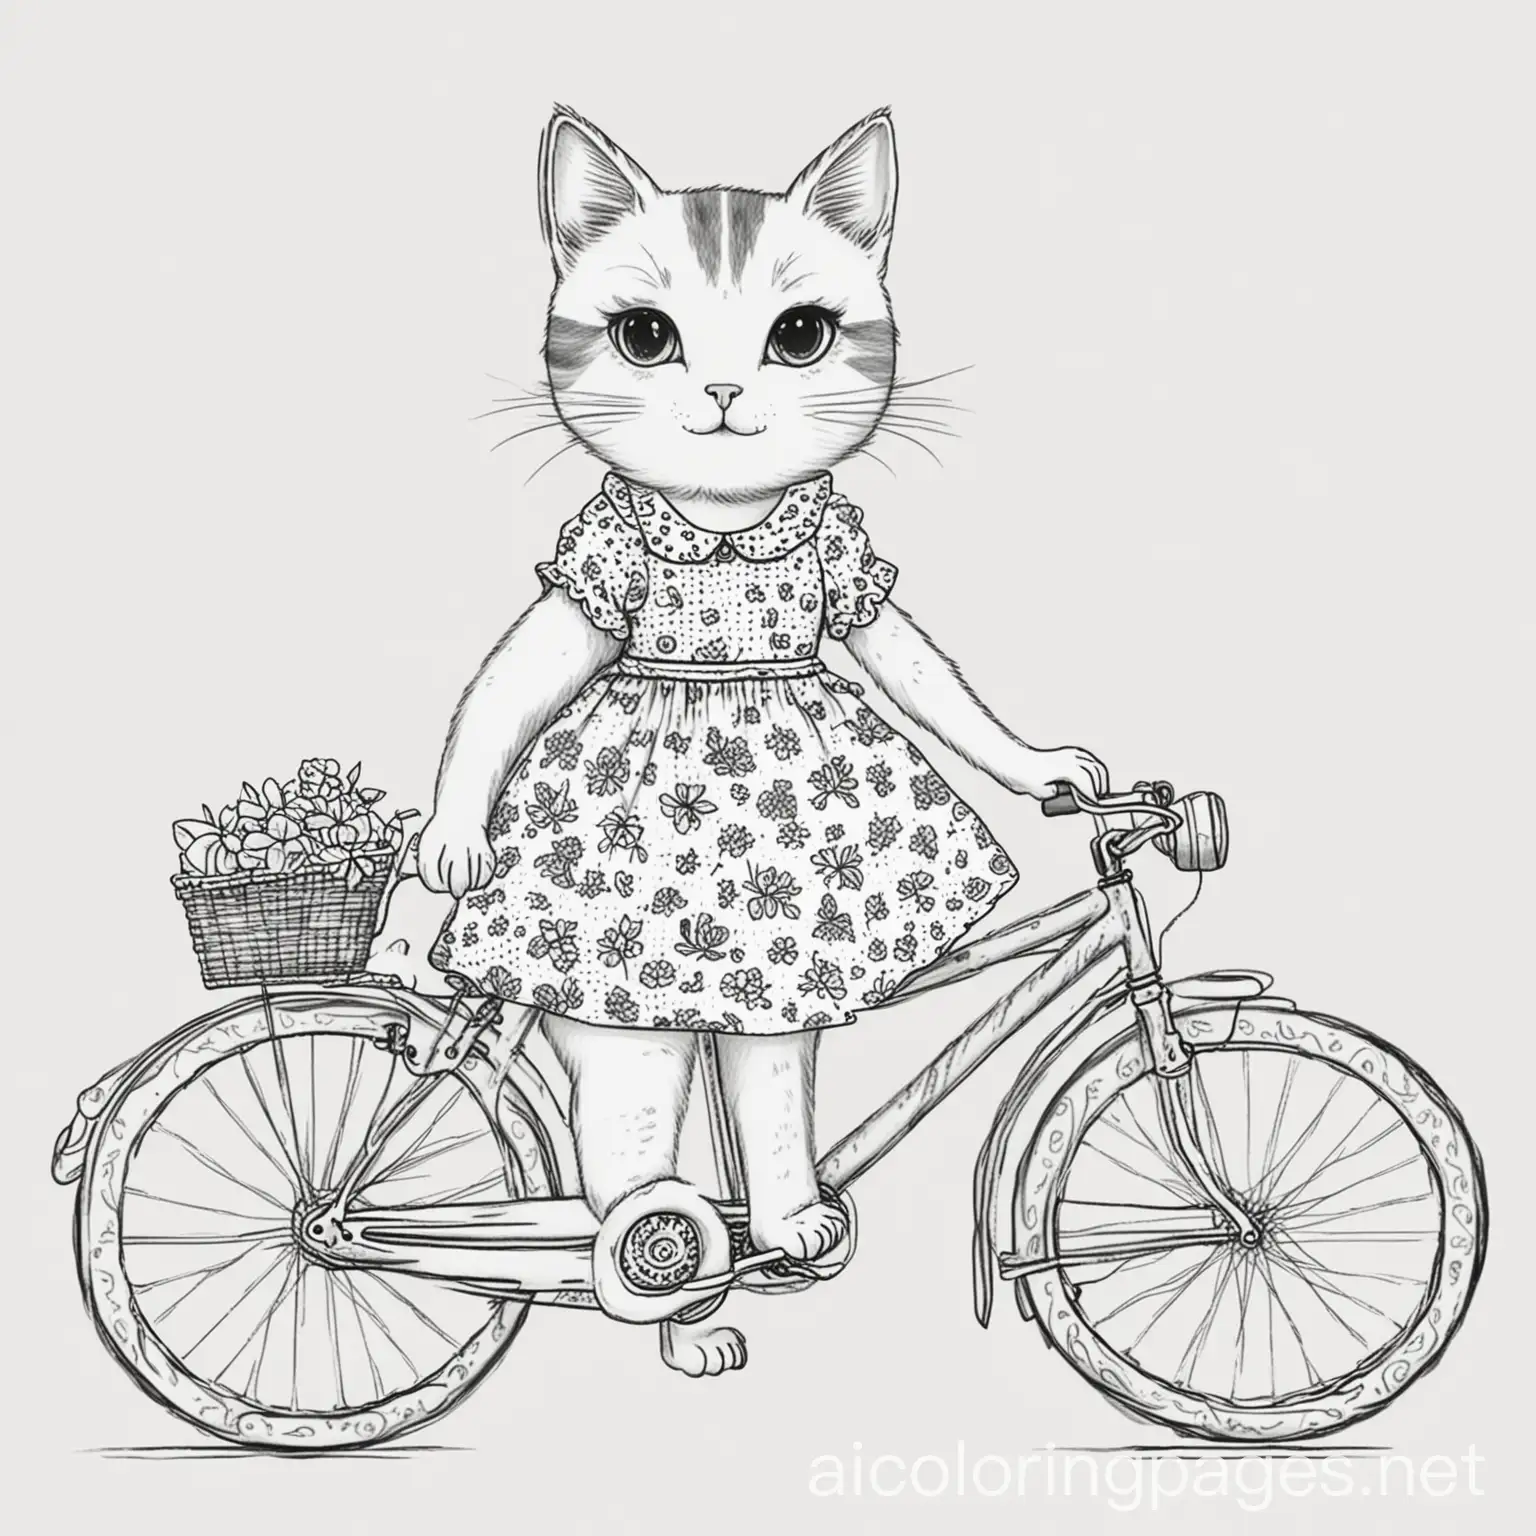 A pretty female cat riding a bicycle wearing a cute dress, Coloring Page, black and white, line art, white background, Simplicity, Ample White Space. The background of the coloring page is plain white to make it easy for young children to color within the lines. The outlines of all the subjects are easy to distinguish, making it simple for kids to color without too much difficulty